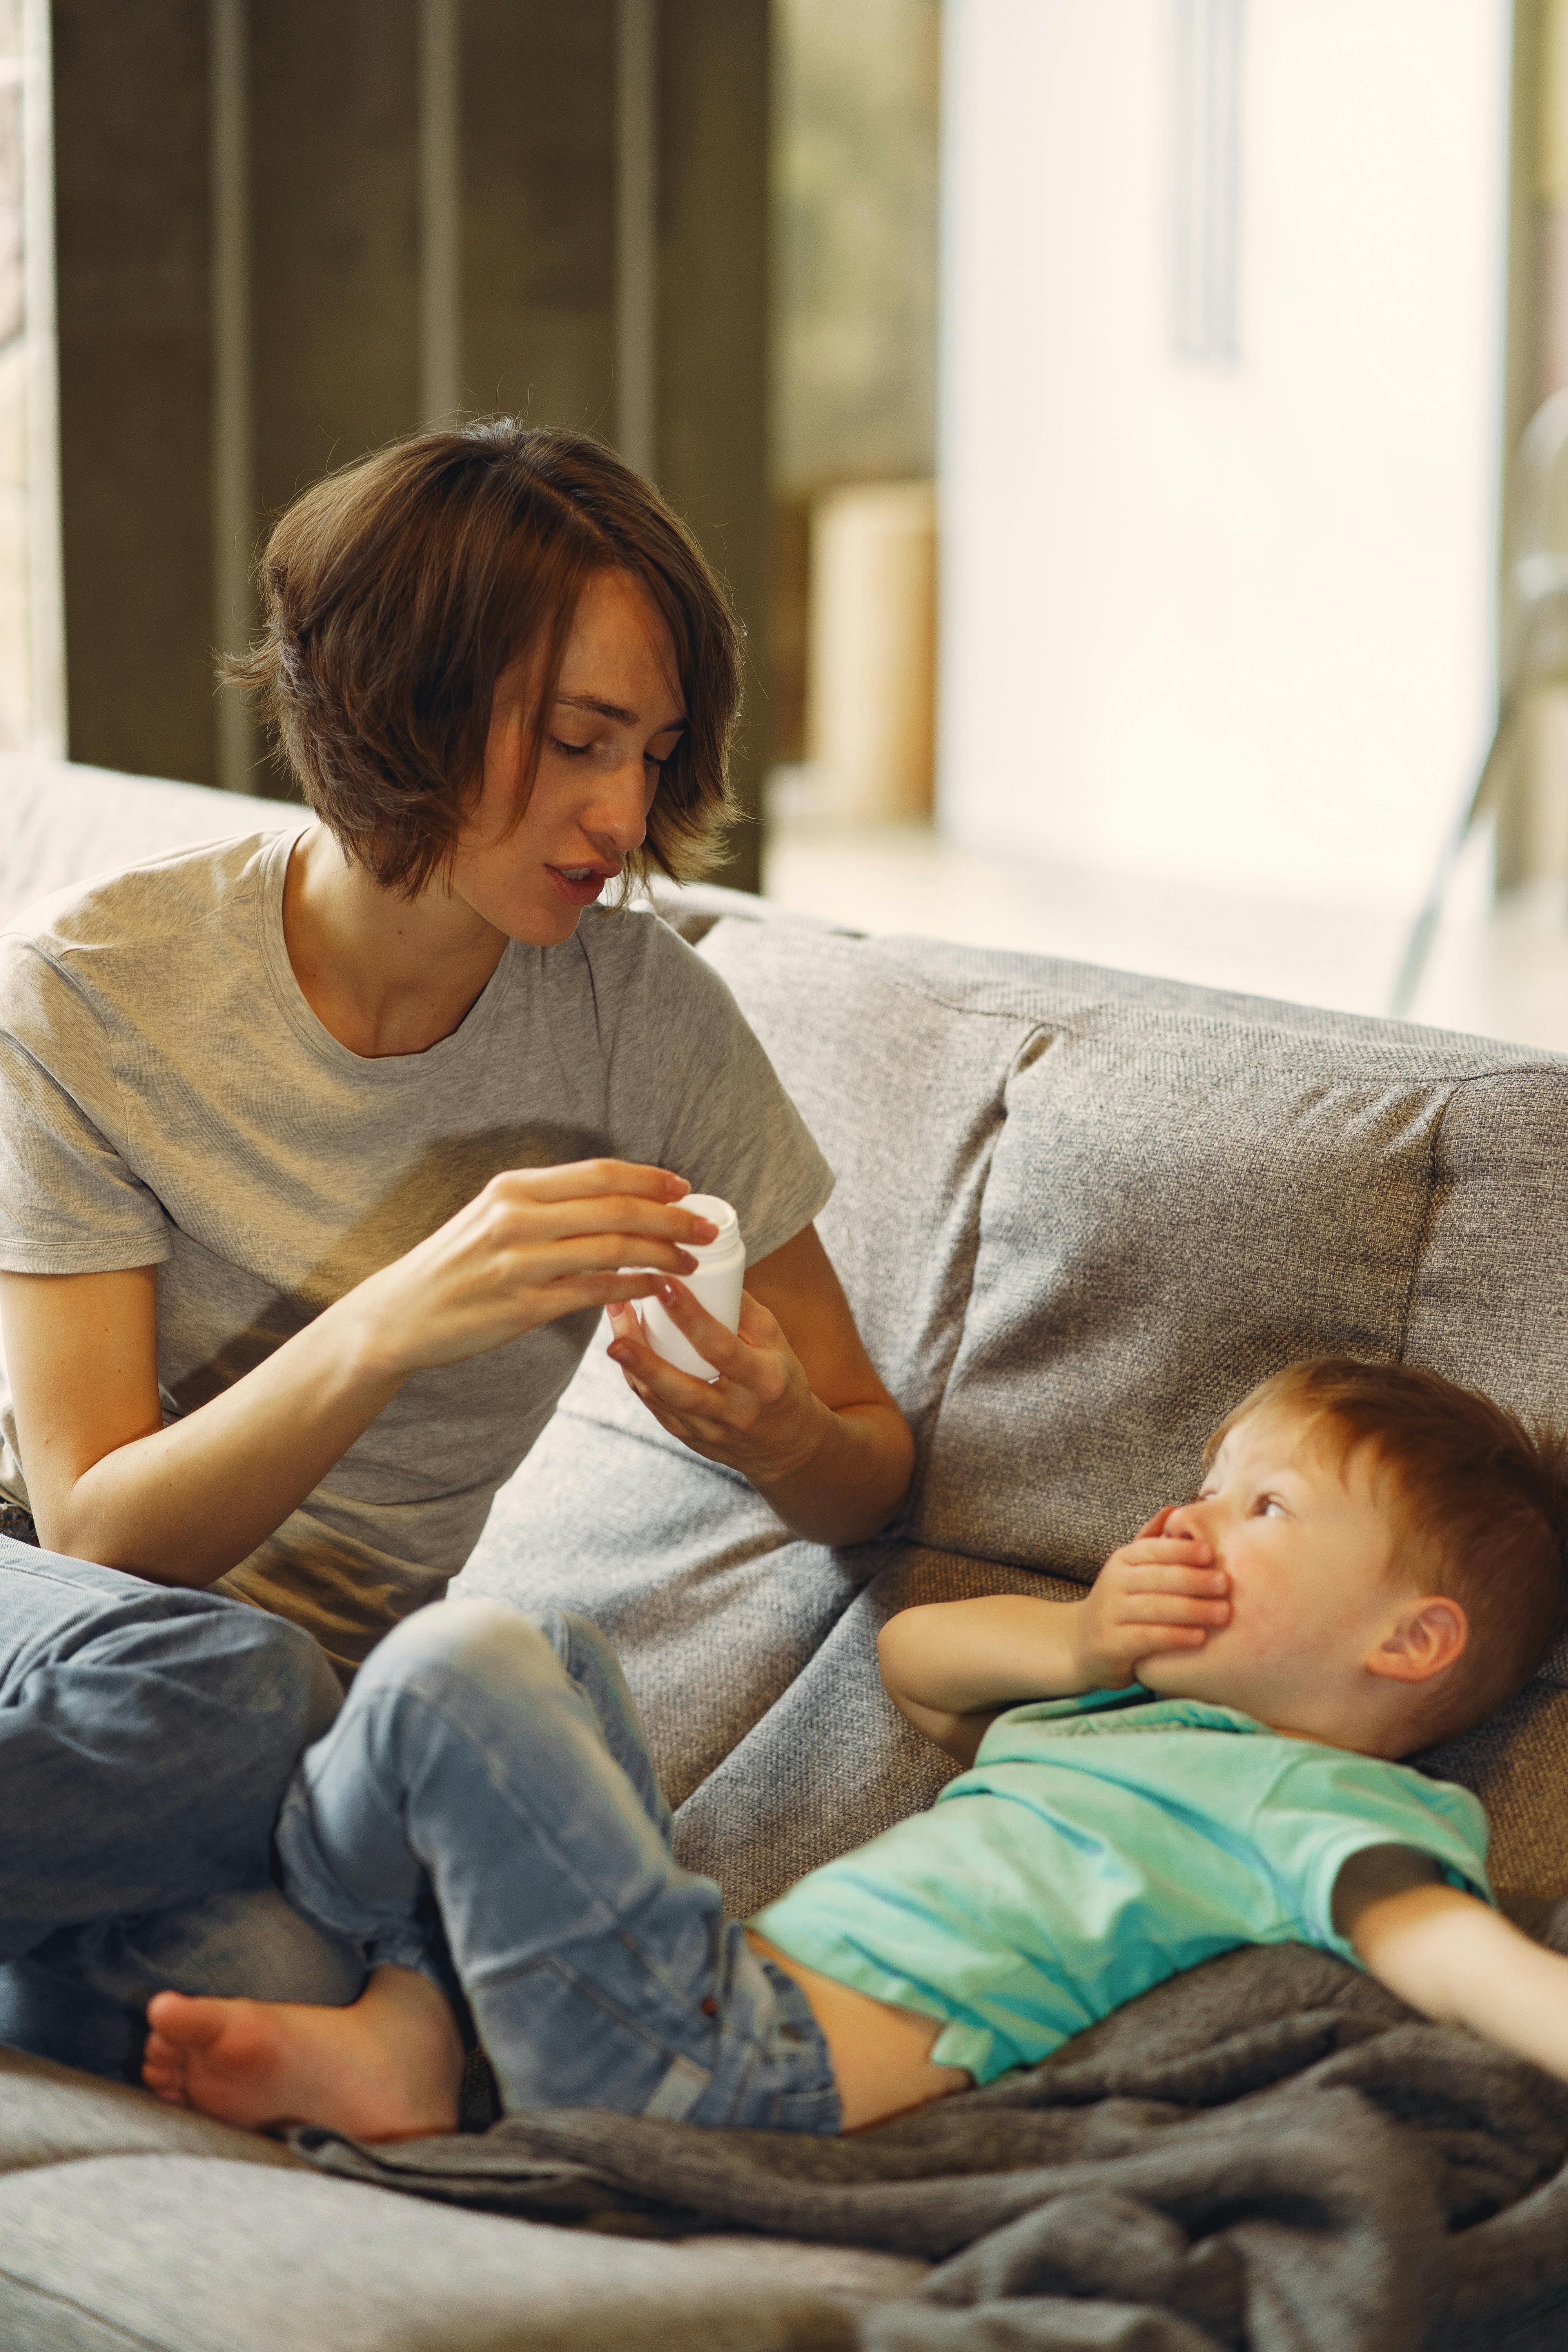 Little boy with his mother on the couch, his hand on his mouth | Source: Pexels